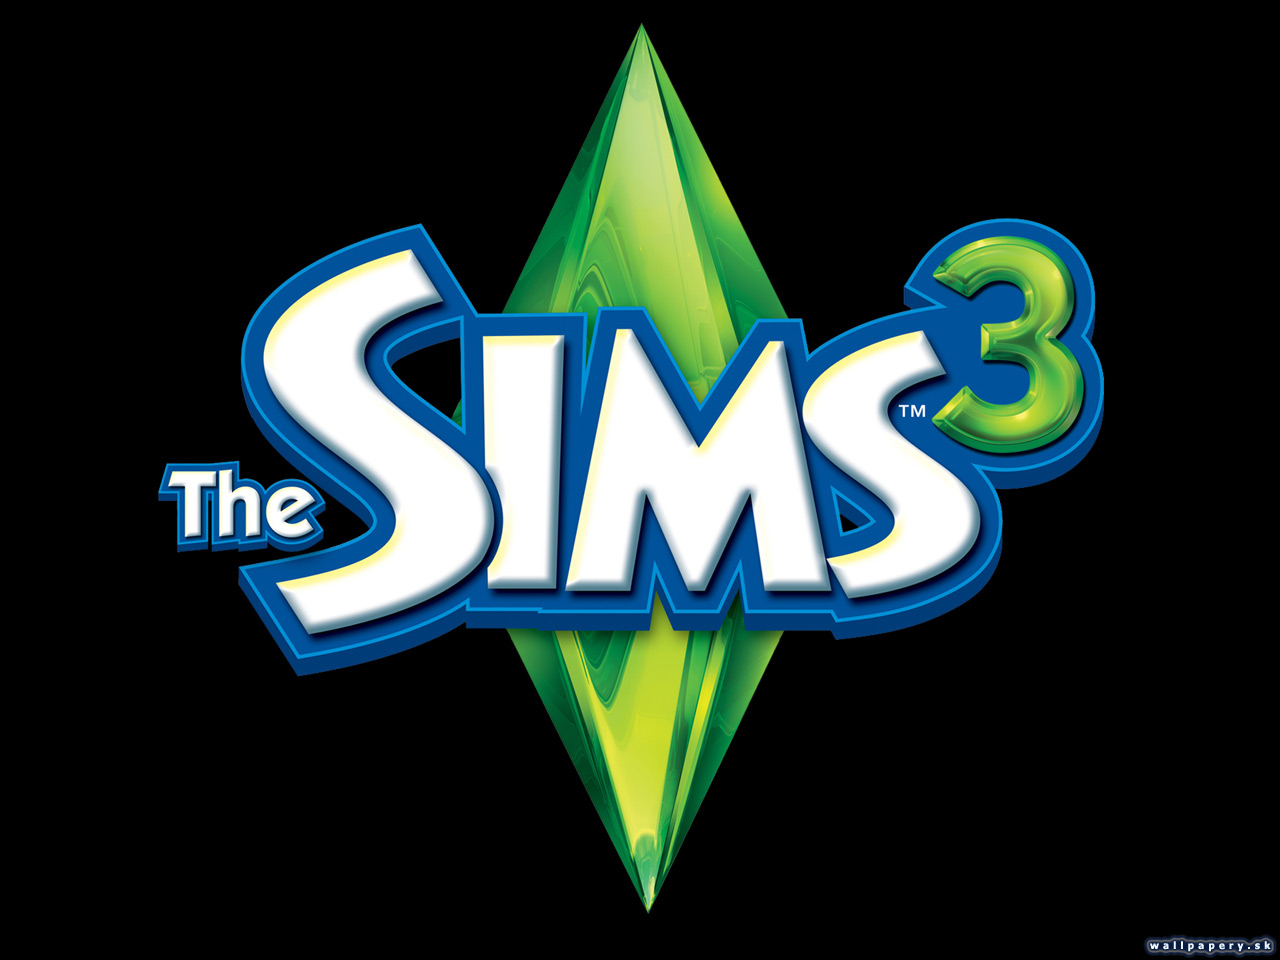 The Sims 3 - wallpaper 1